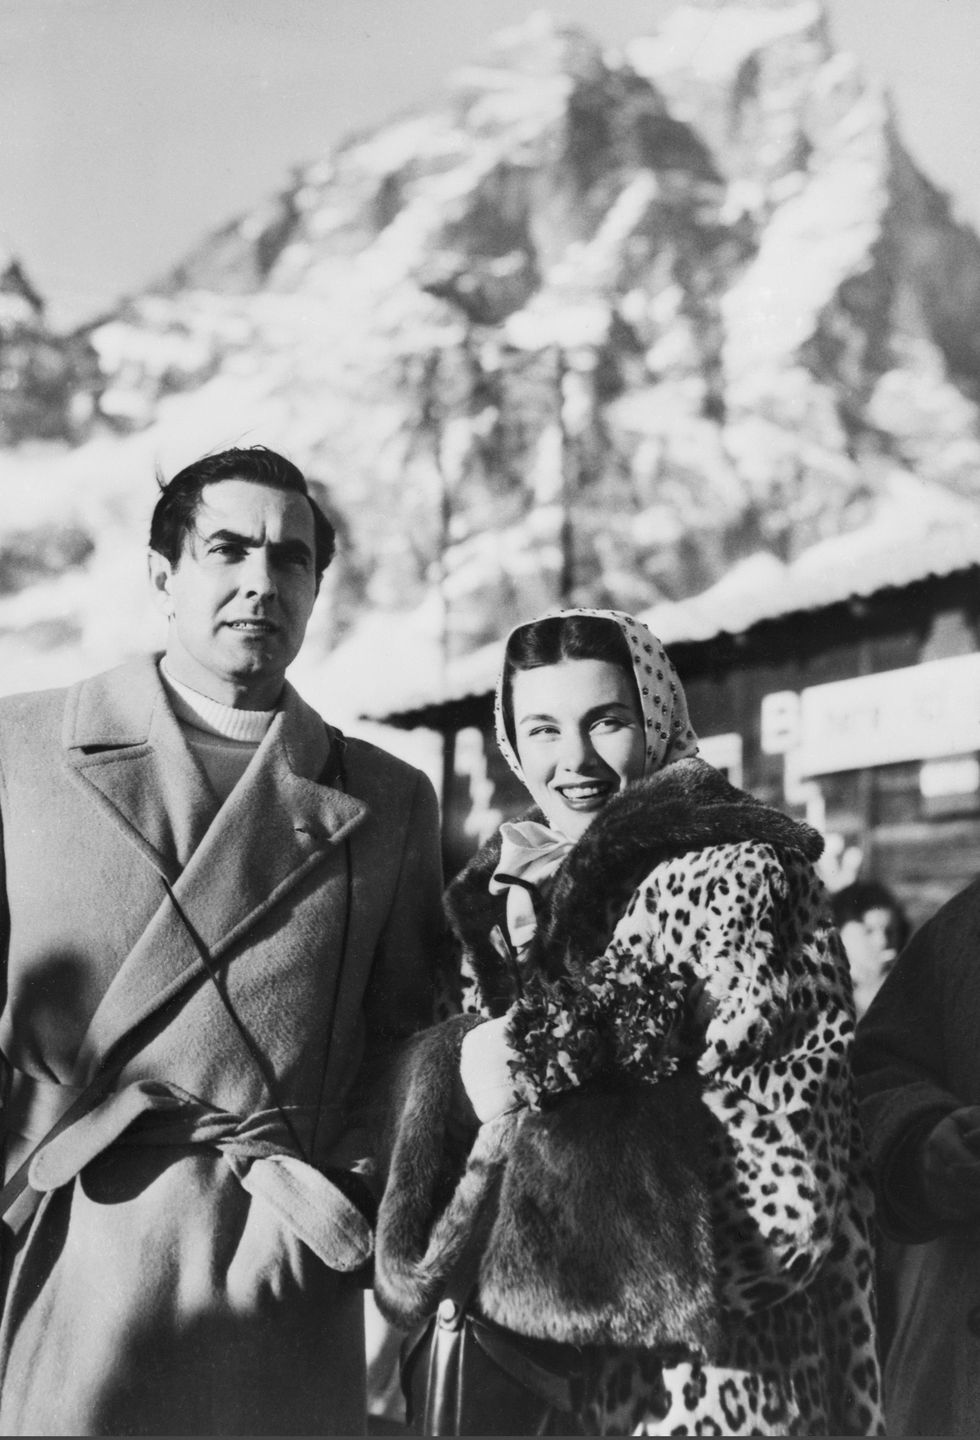 tyrone power and wife linda christian in the italian alps